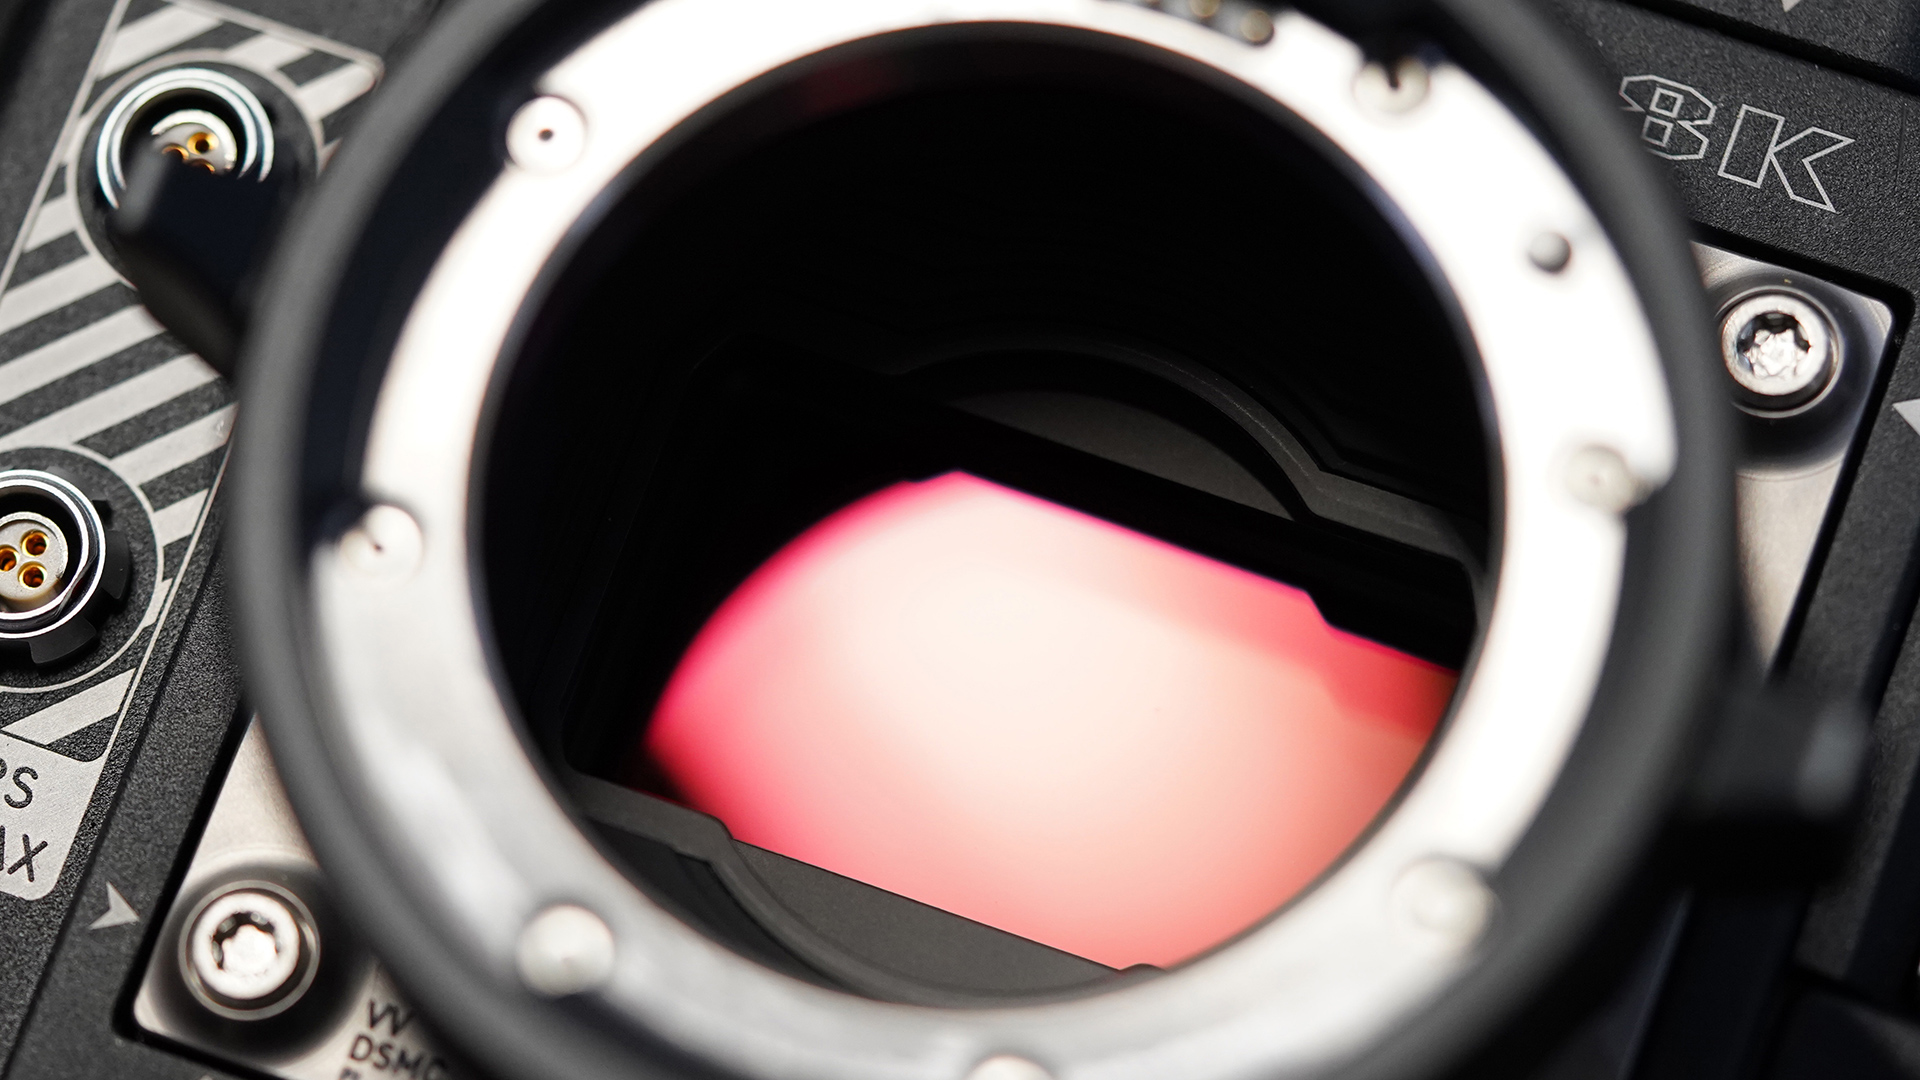 How accurate is the flage-to-sensor distance on your camera? The results may surprise you. Image: Lens Rentals.